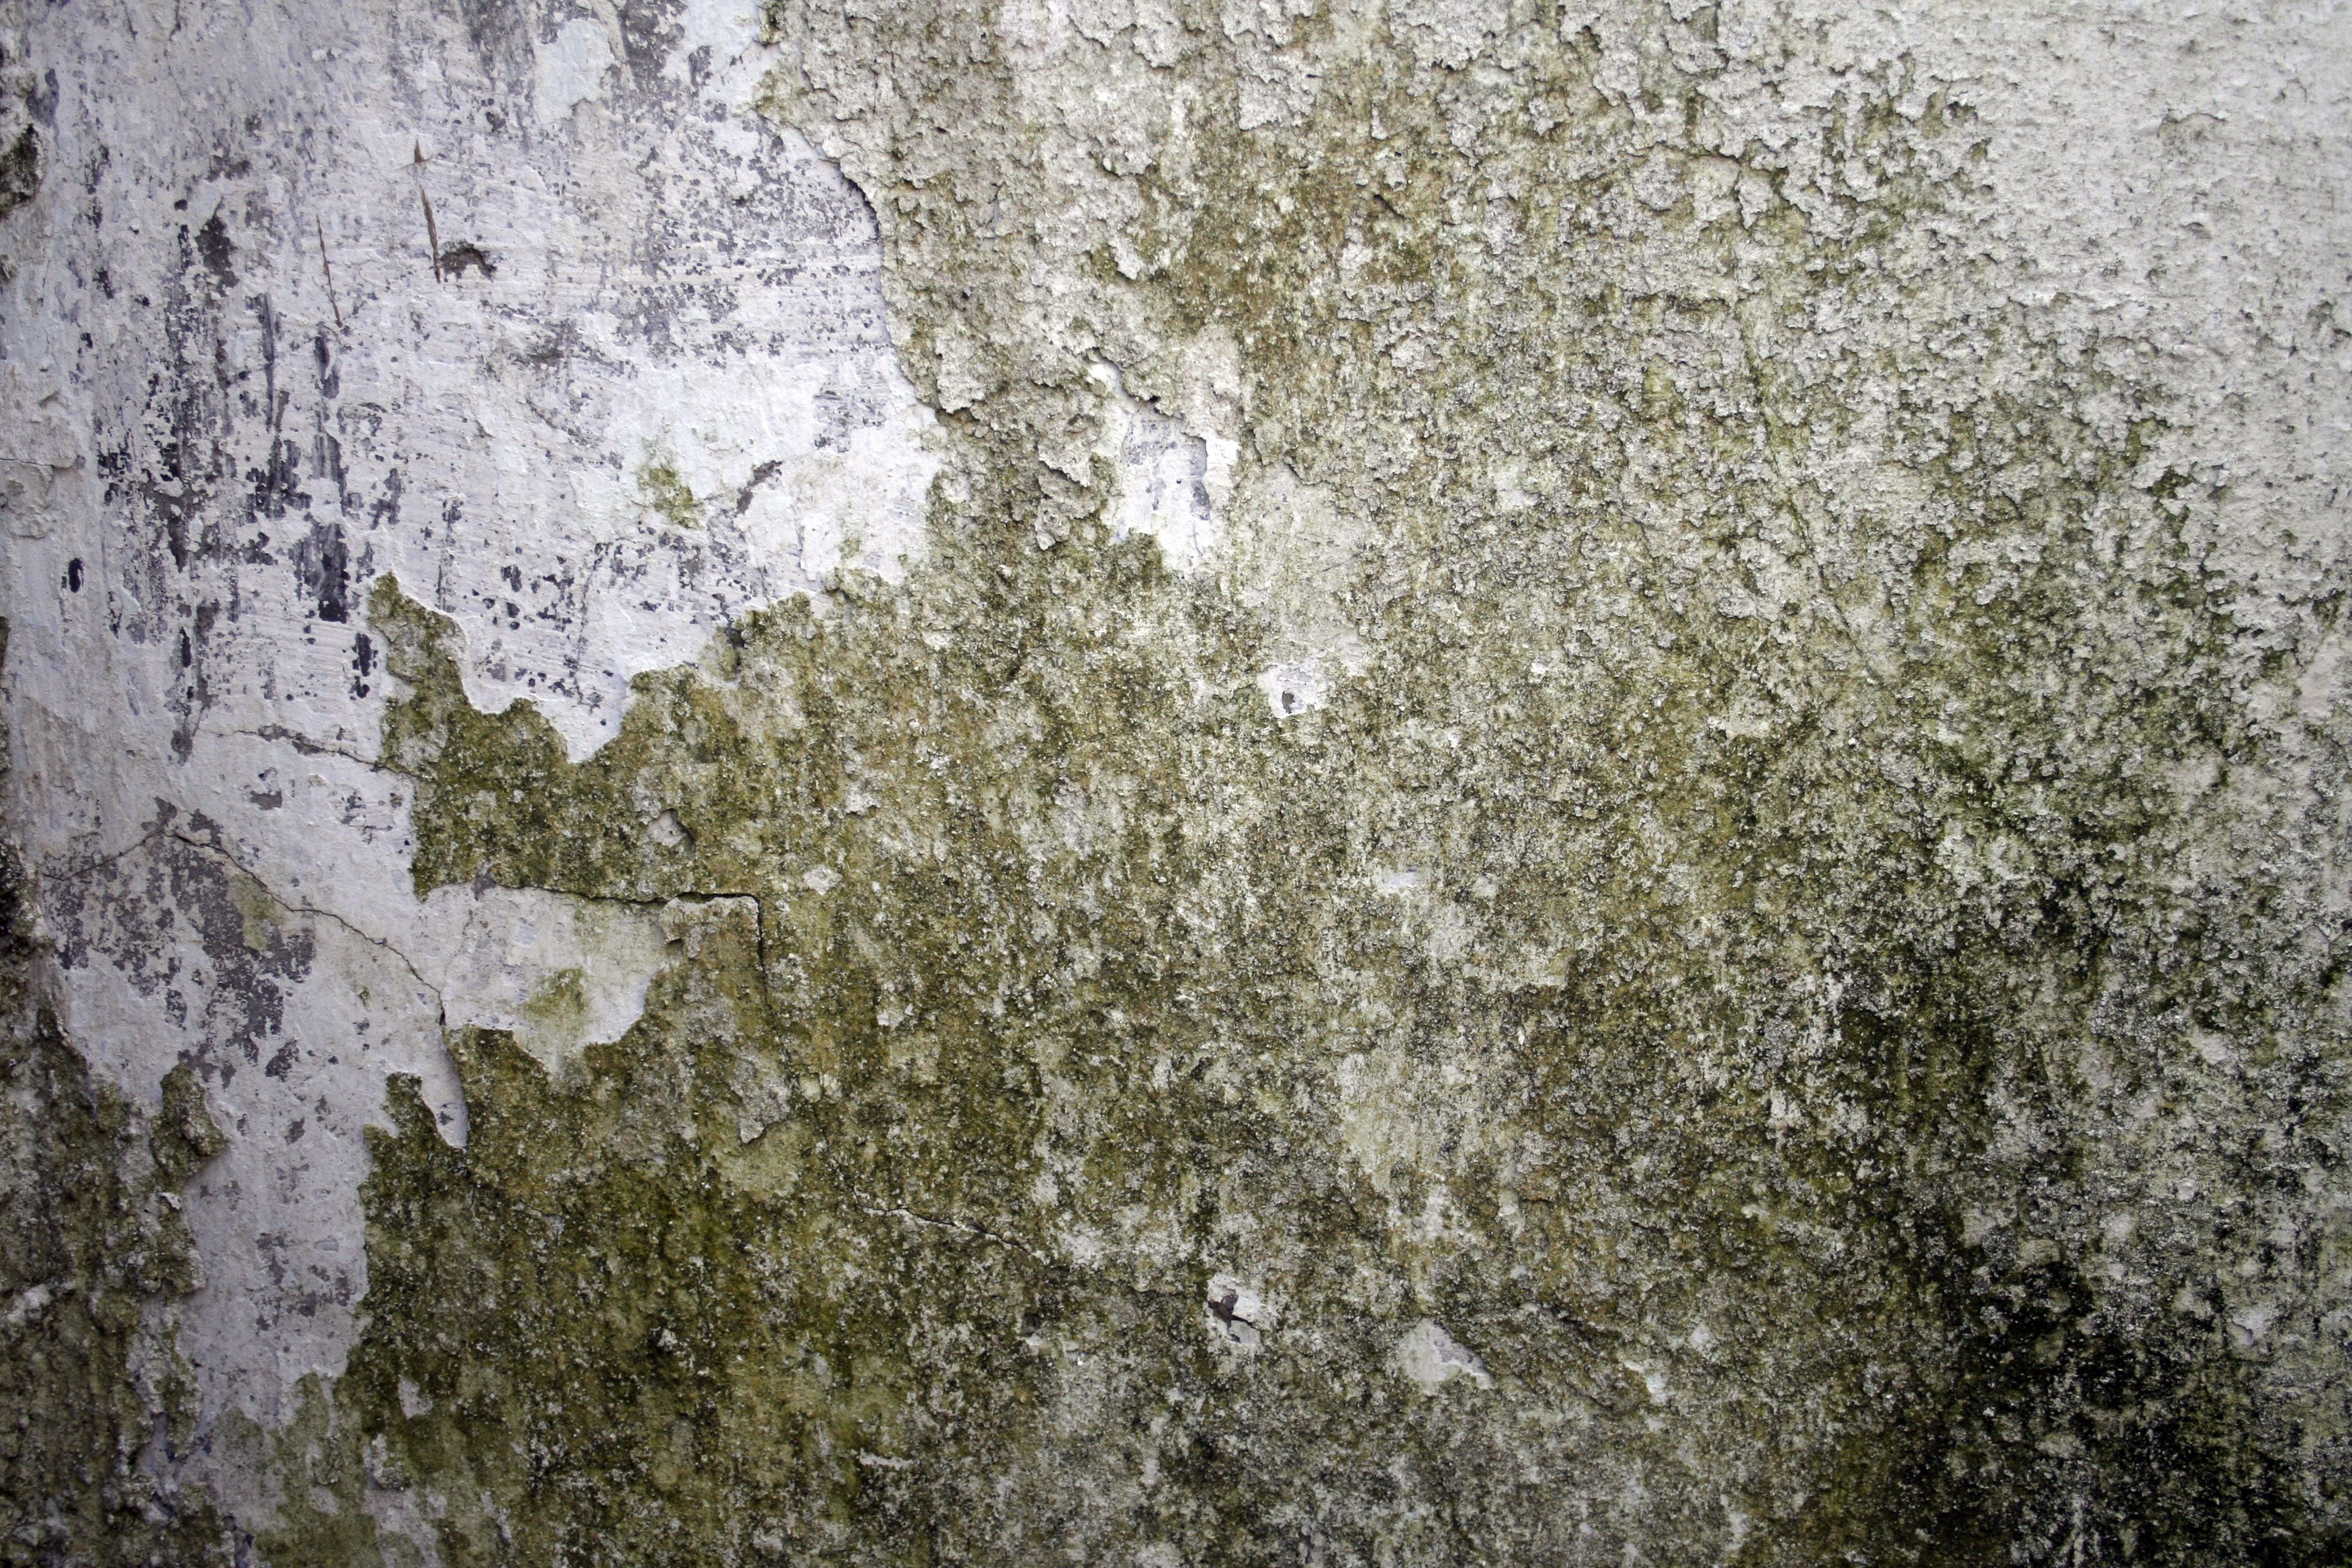 http://www.texturepalace.com/gallery/wall/110403/dirty-wall-texture ...